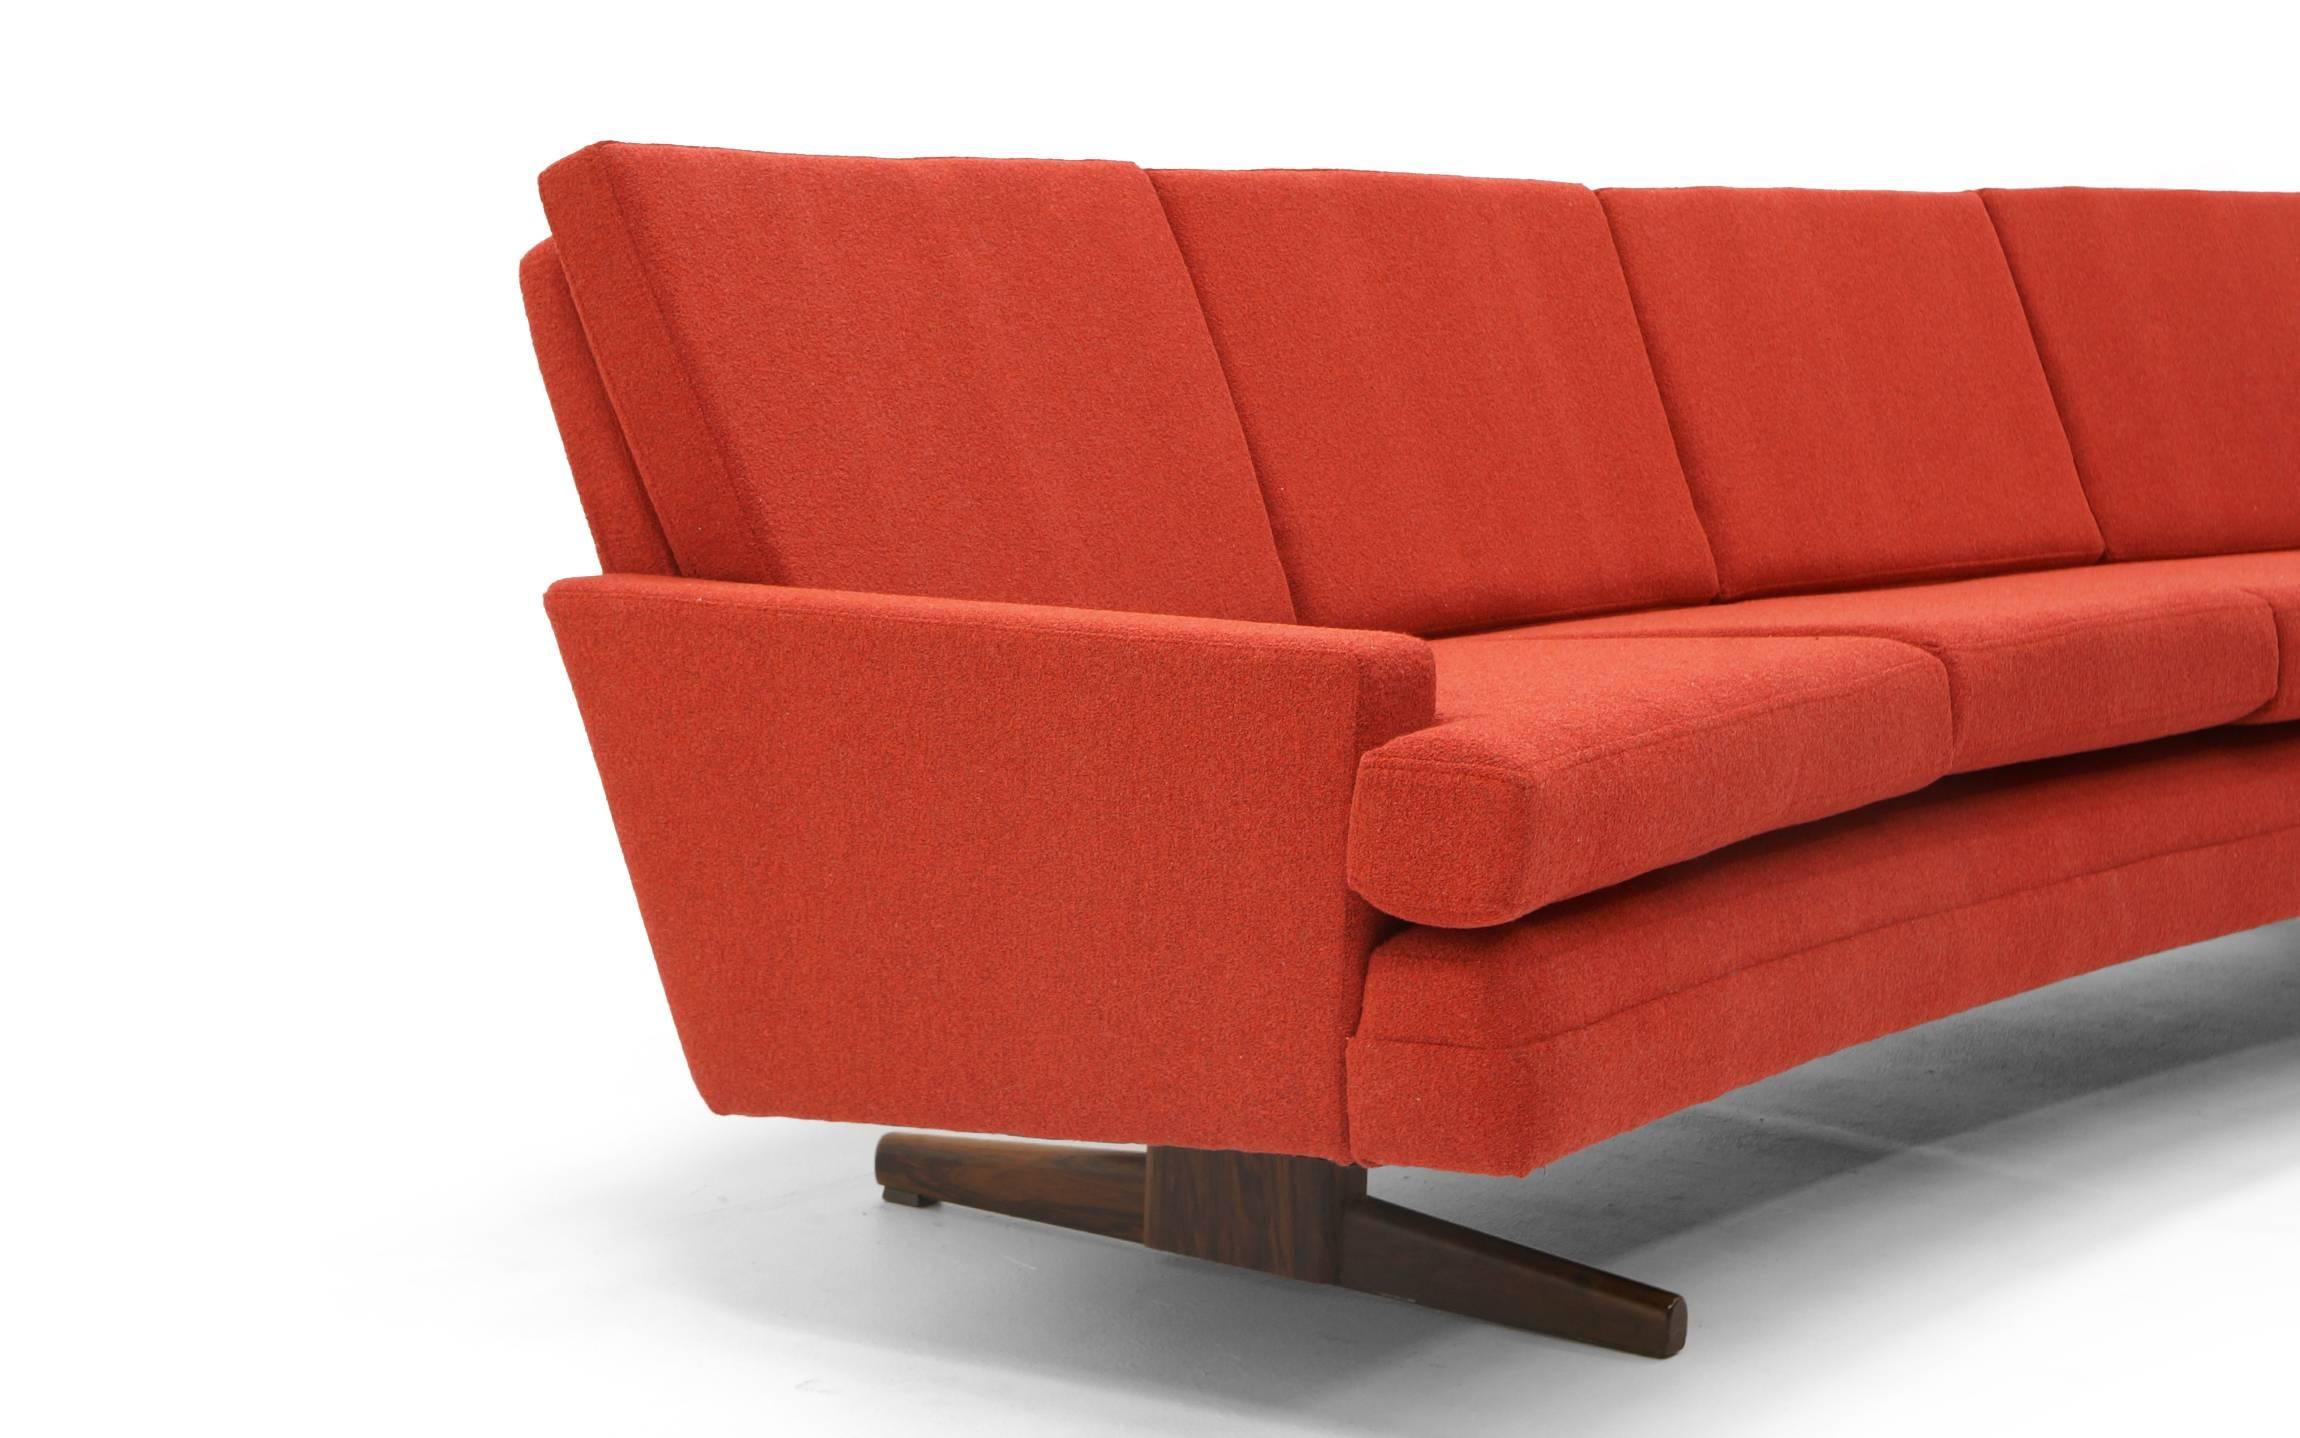 Scandinavian Modern Curved Sofa by Frederick Kayser Restored Redone in Rich Red Knoll Cuddle Cloth